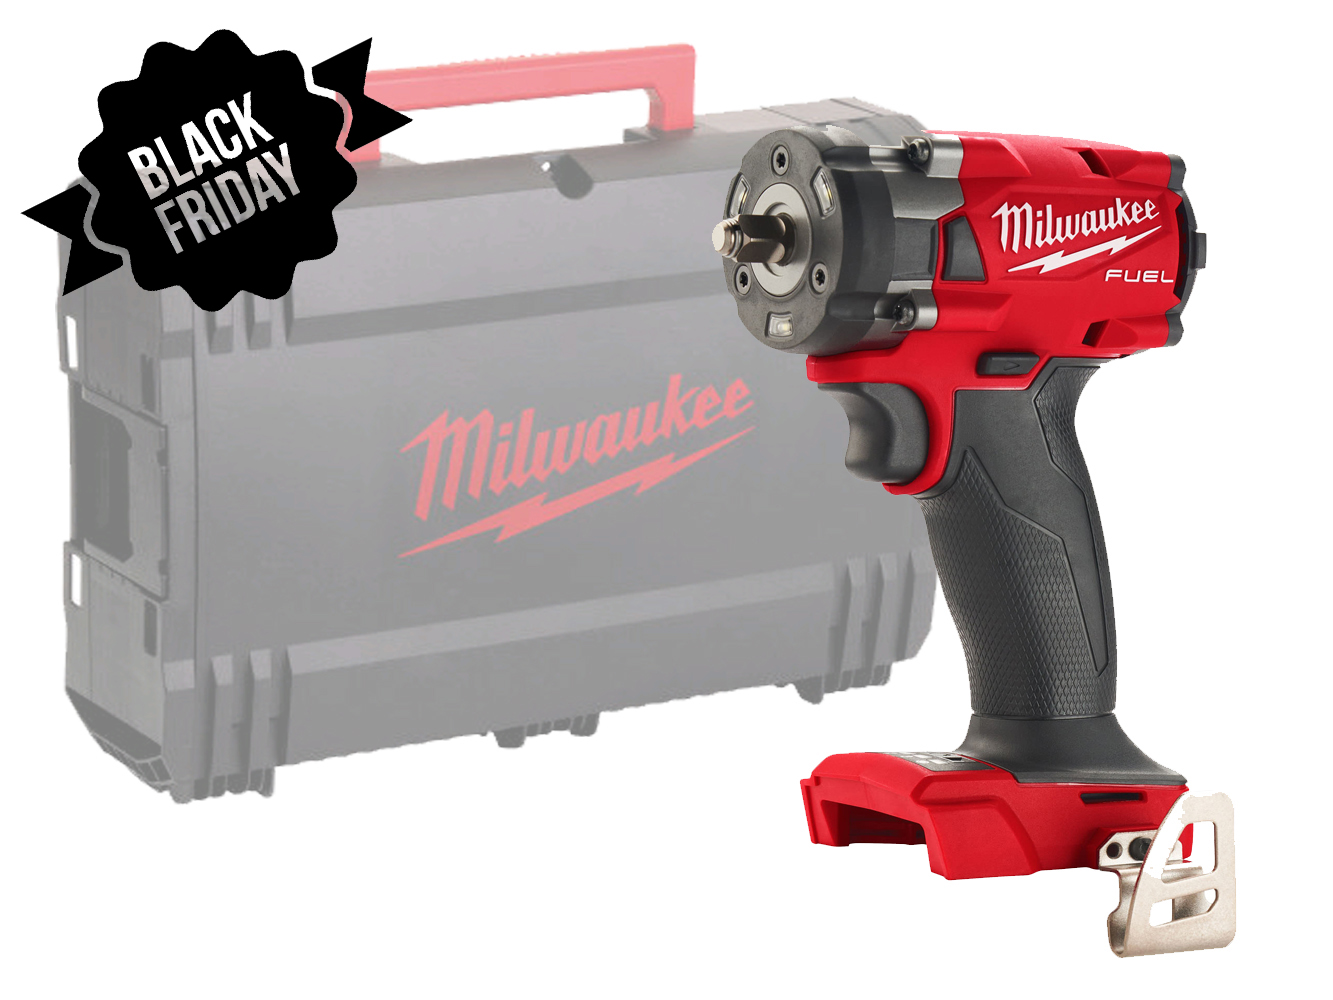 Milwaukee M18FIW2F38 18V Fuel Brushless 2nd Gen 3/8in Impact Wrench - Body Only